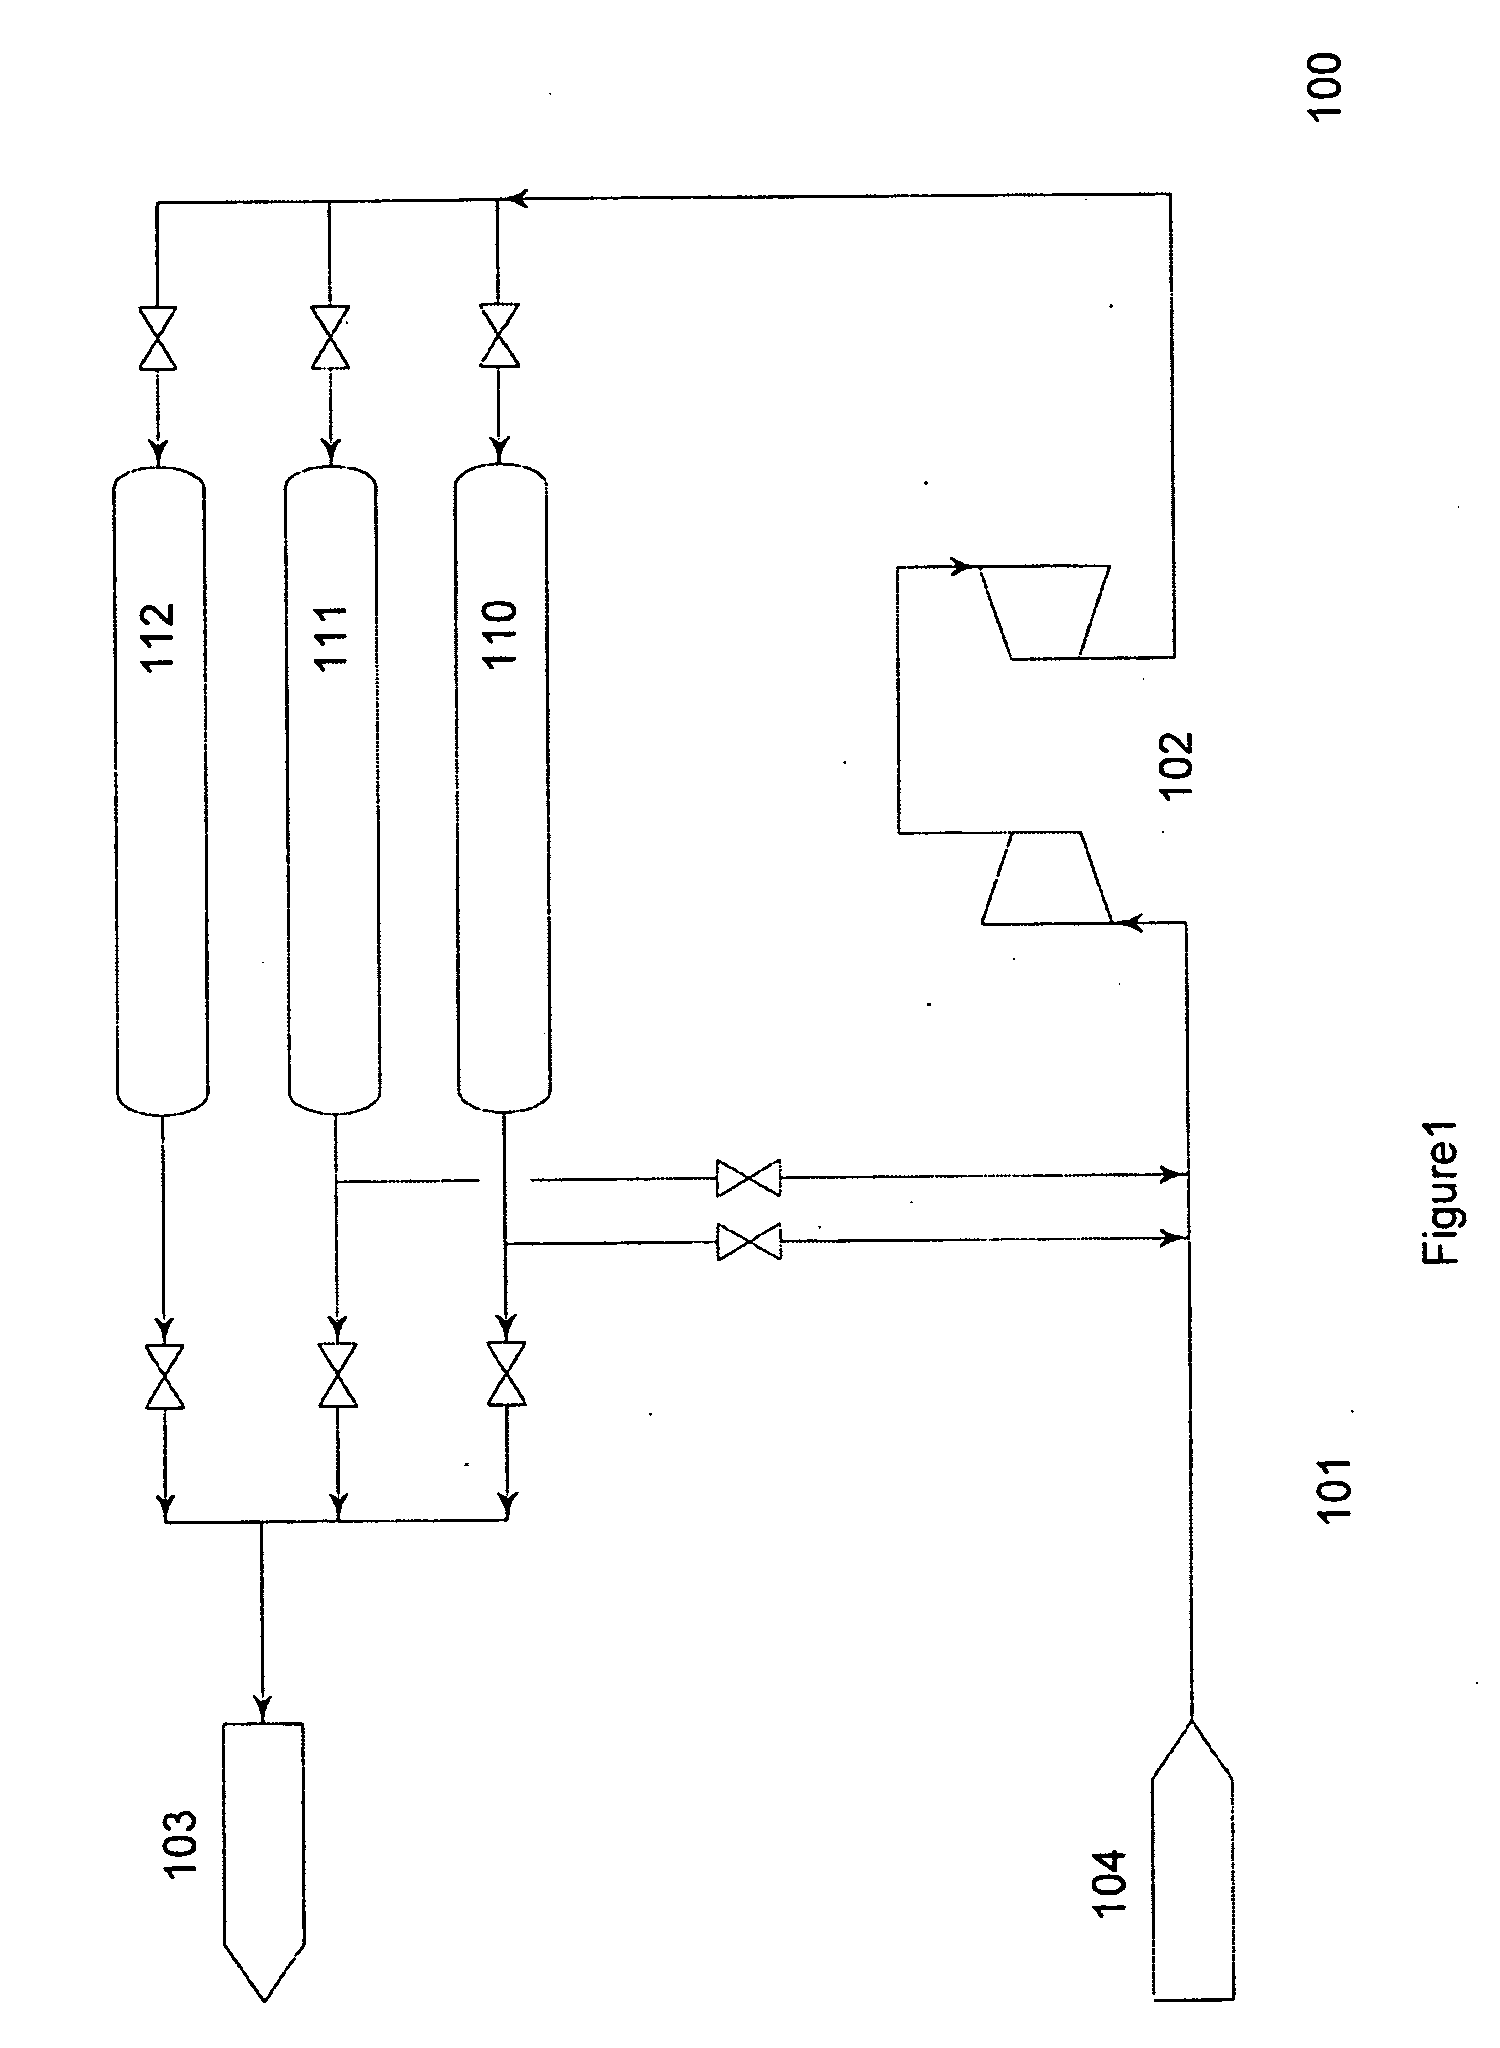 Method for managing storage of gaseous hydrogen